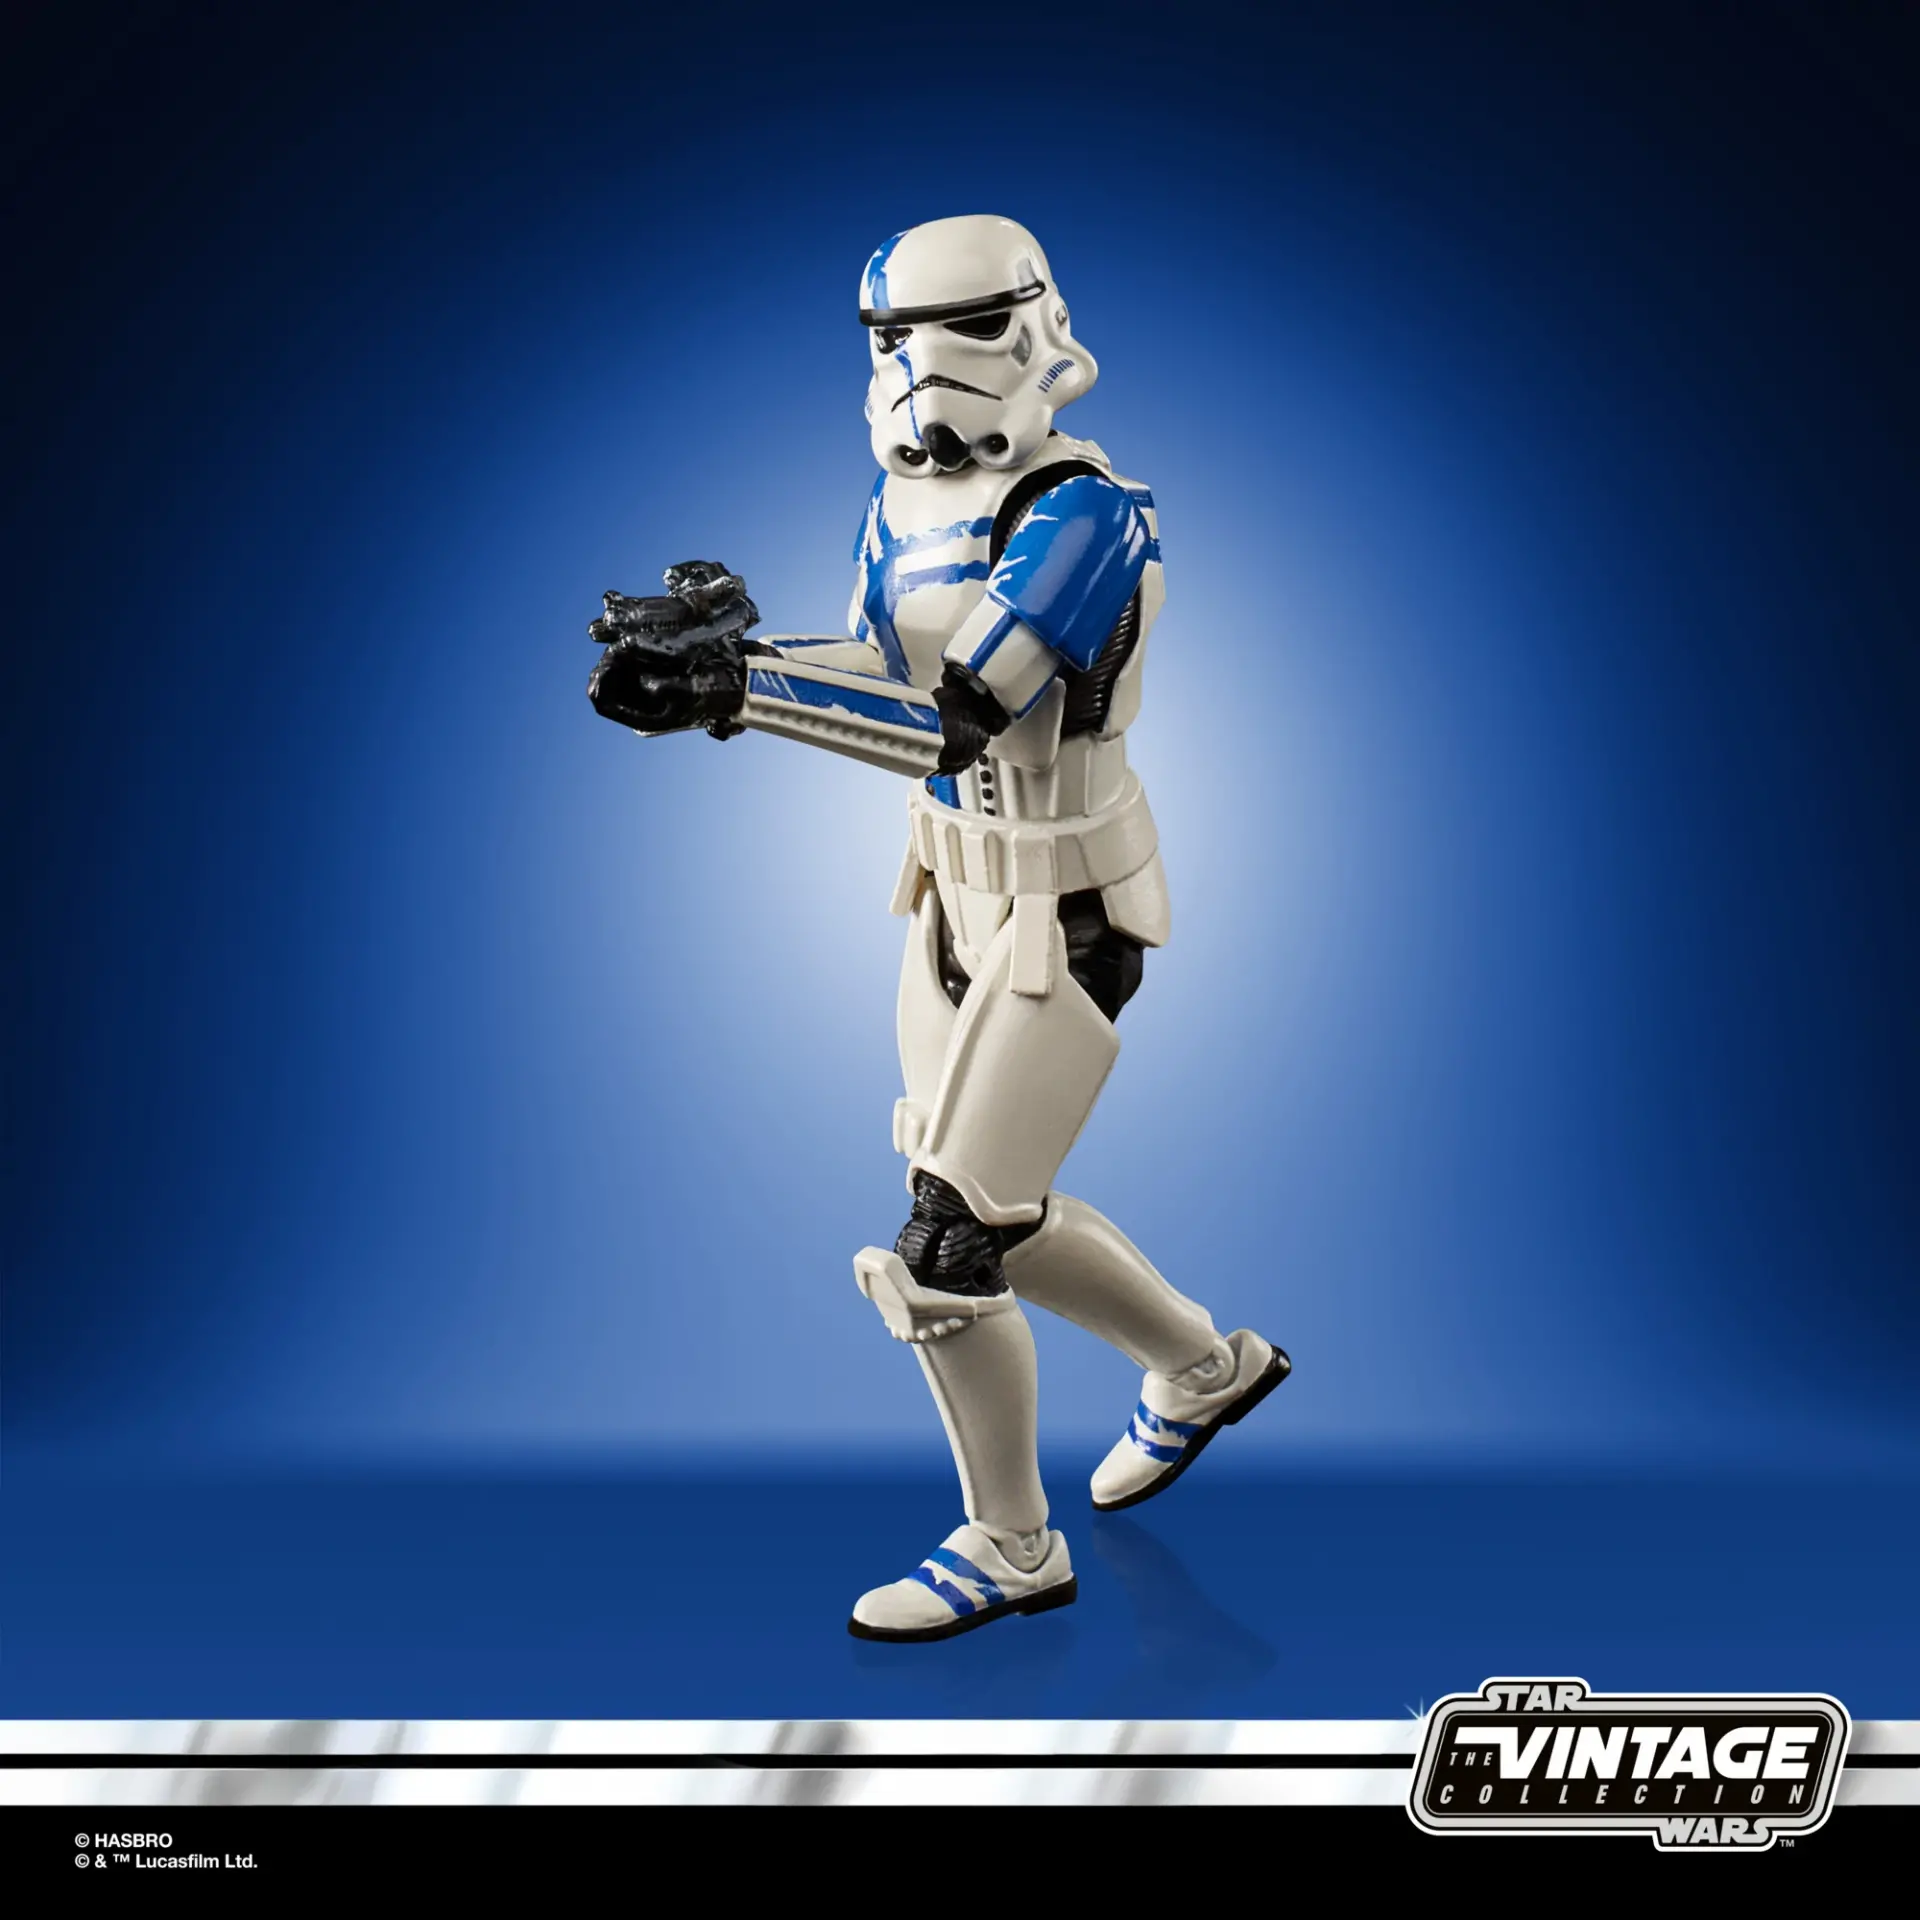 Star wars the vintage collection gaming greats stormtrooper commander jawascave 2